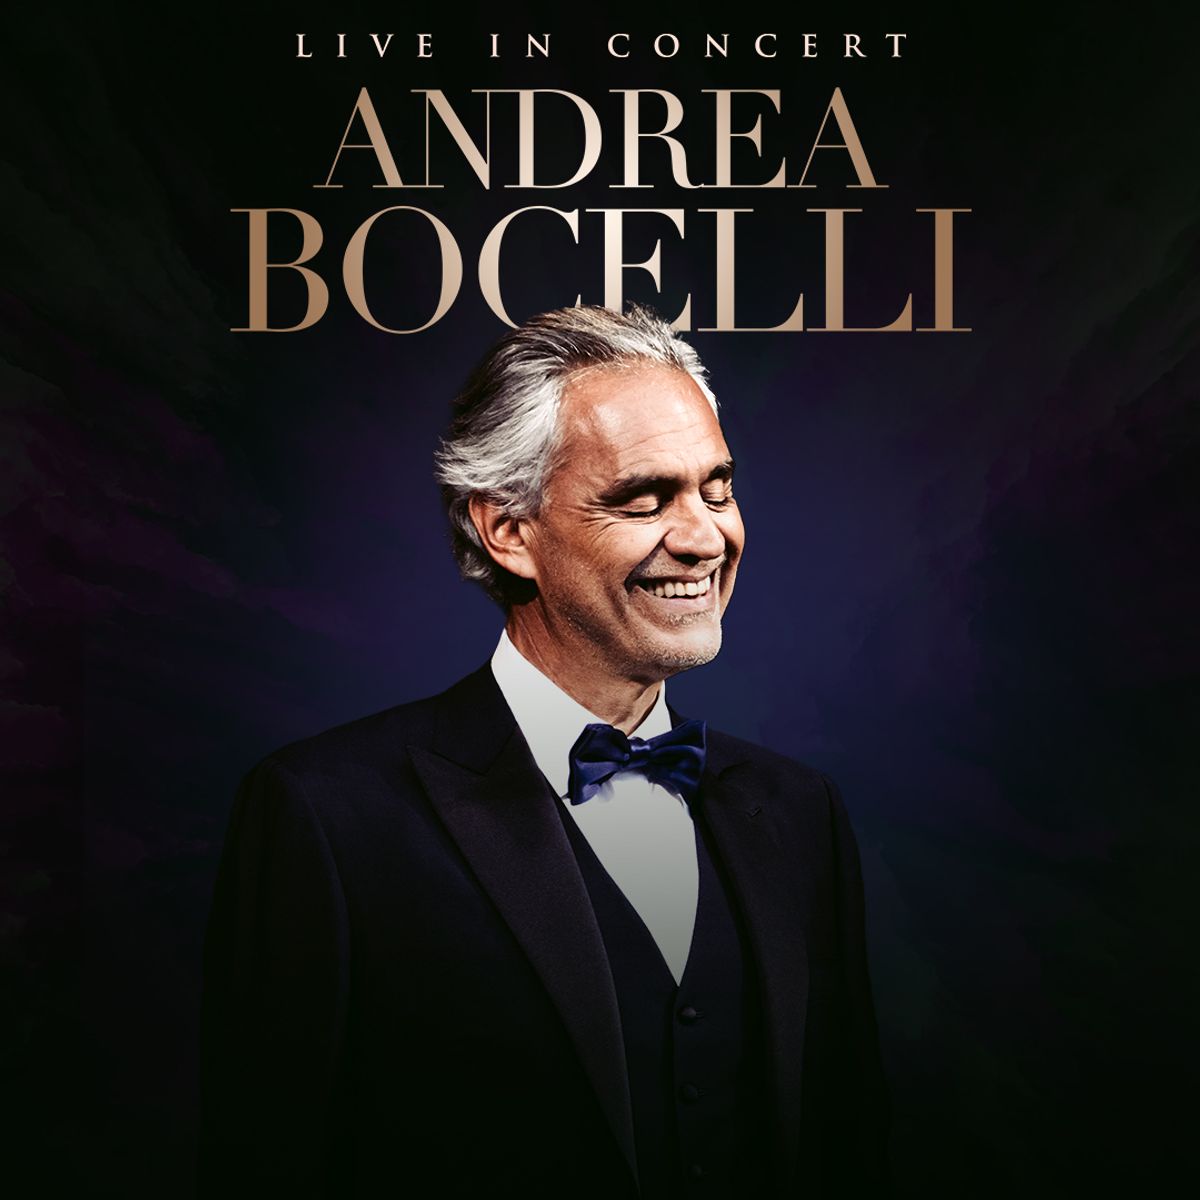 Andrea Bocelli at Climate Pledge Arena in Seattle, WA Sunday, May 14